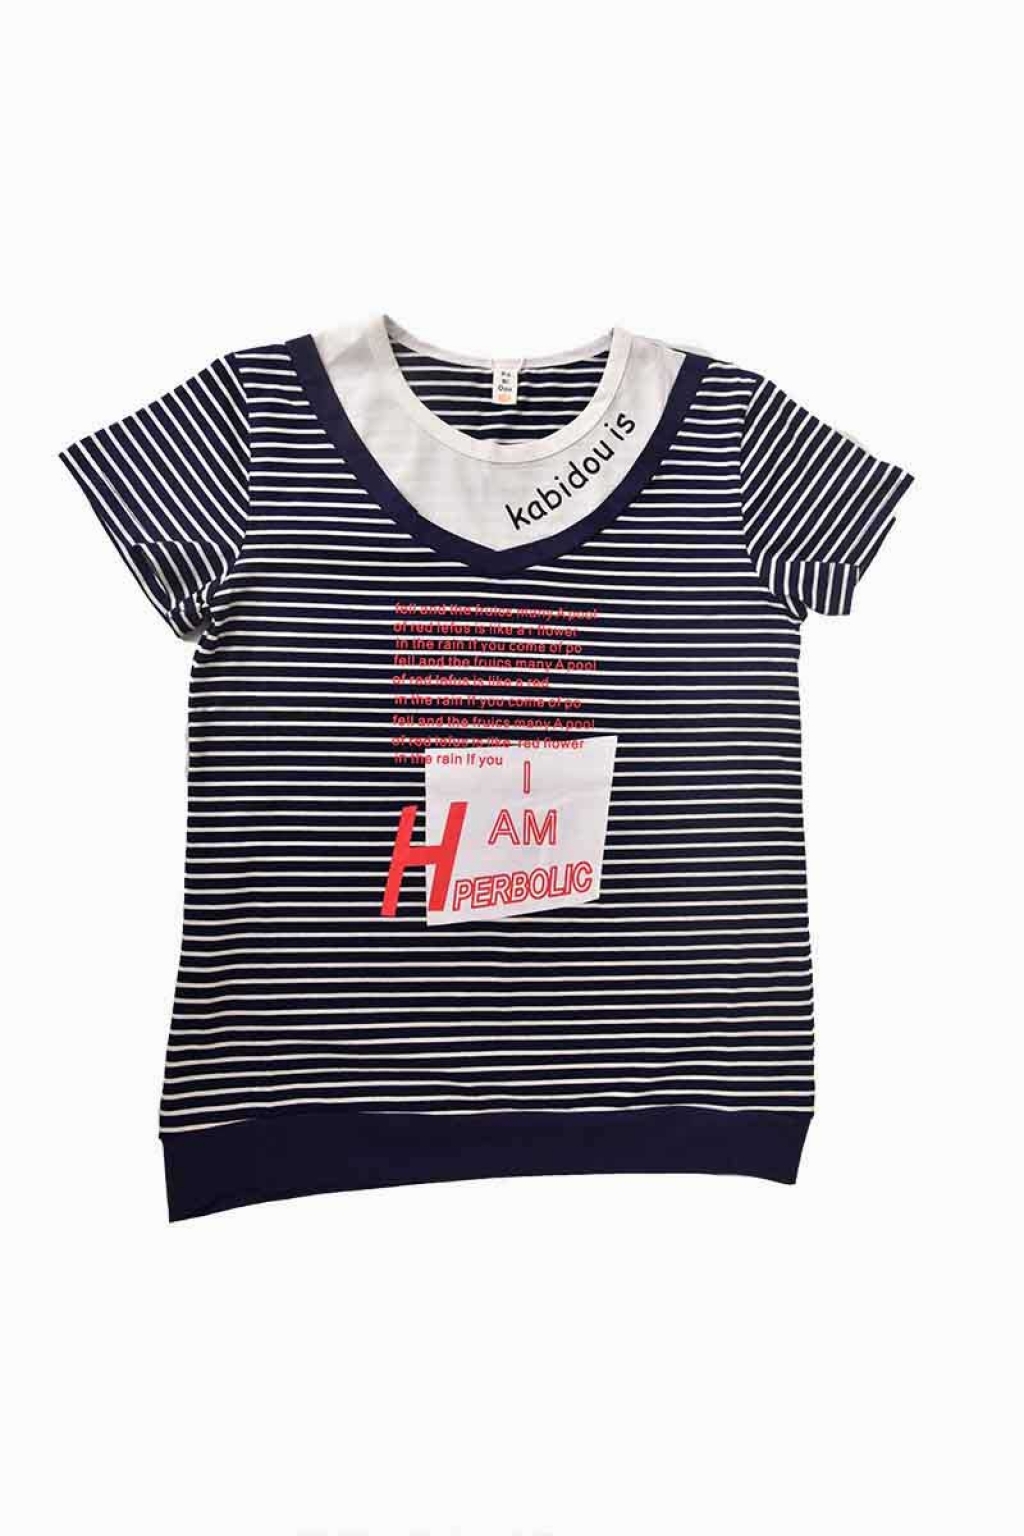 Buy Imported Stripe Design T-shirt in Pakistan | online shopping in ...